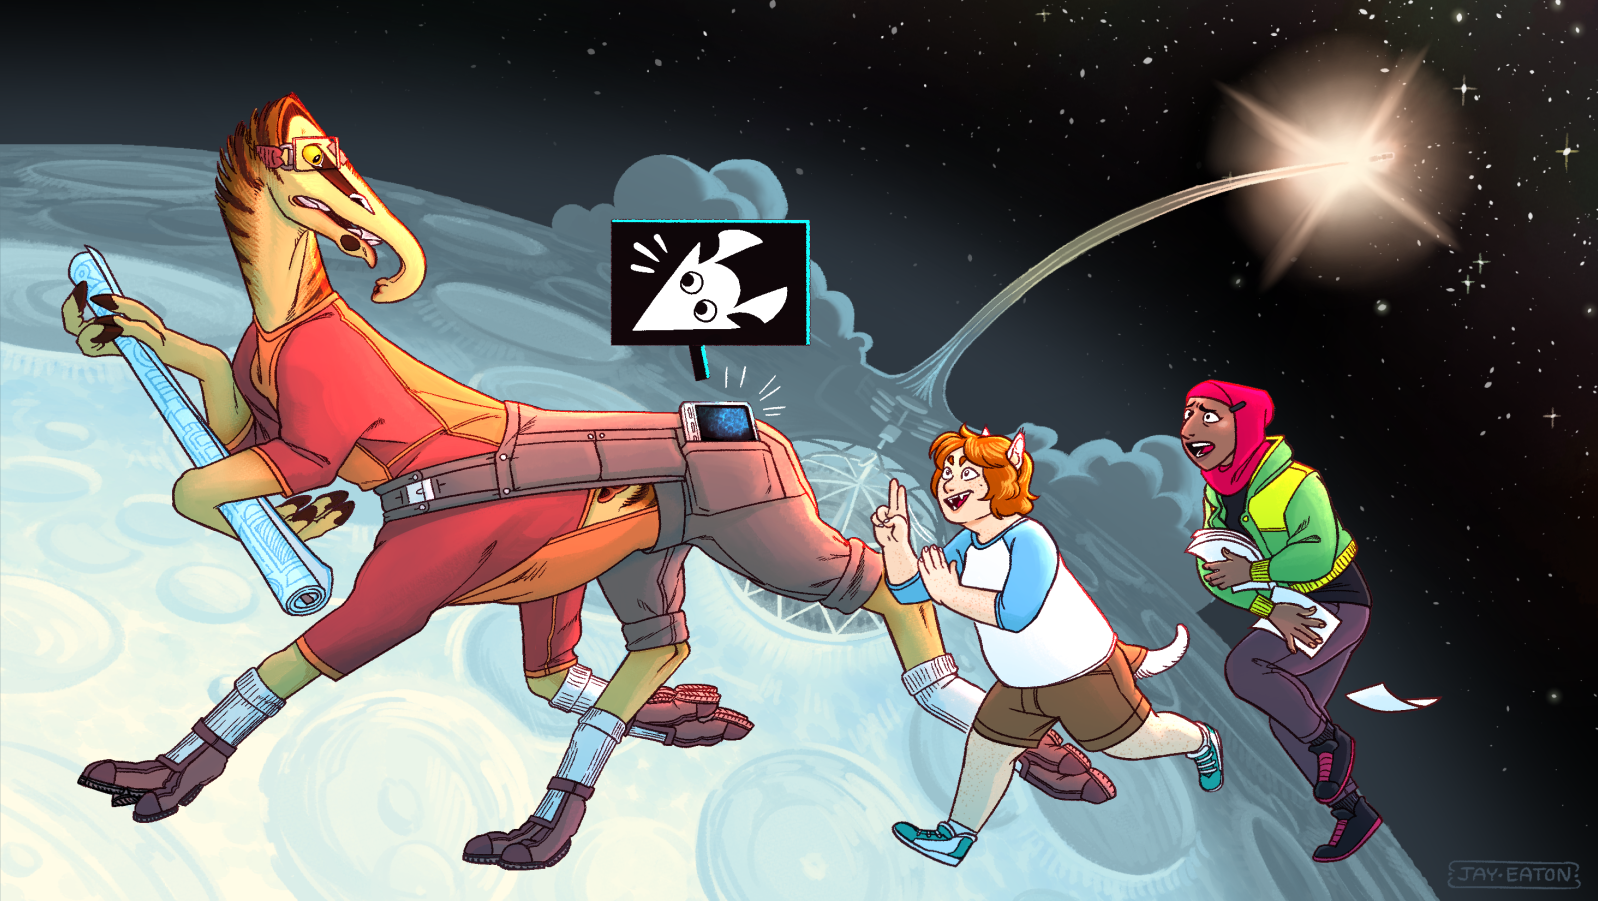 Talita, Gillie, and Idrisah running in a panic. Talita is holding a blueprint, Gillie is signing 'rocket' in ASL, and Idrisah is holding a stack of papers that are falling out of her grasp. In the background, the habitat dome of Dirtball is visible with the Runaway spacecraft launching behind it.